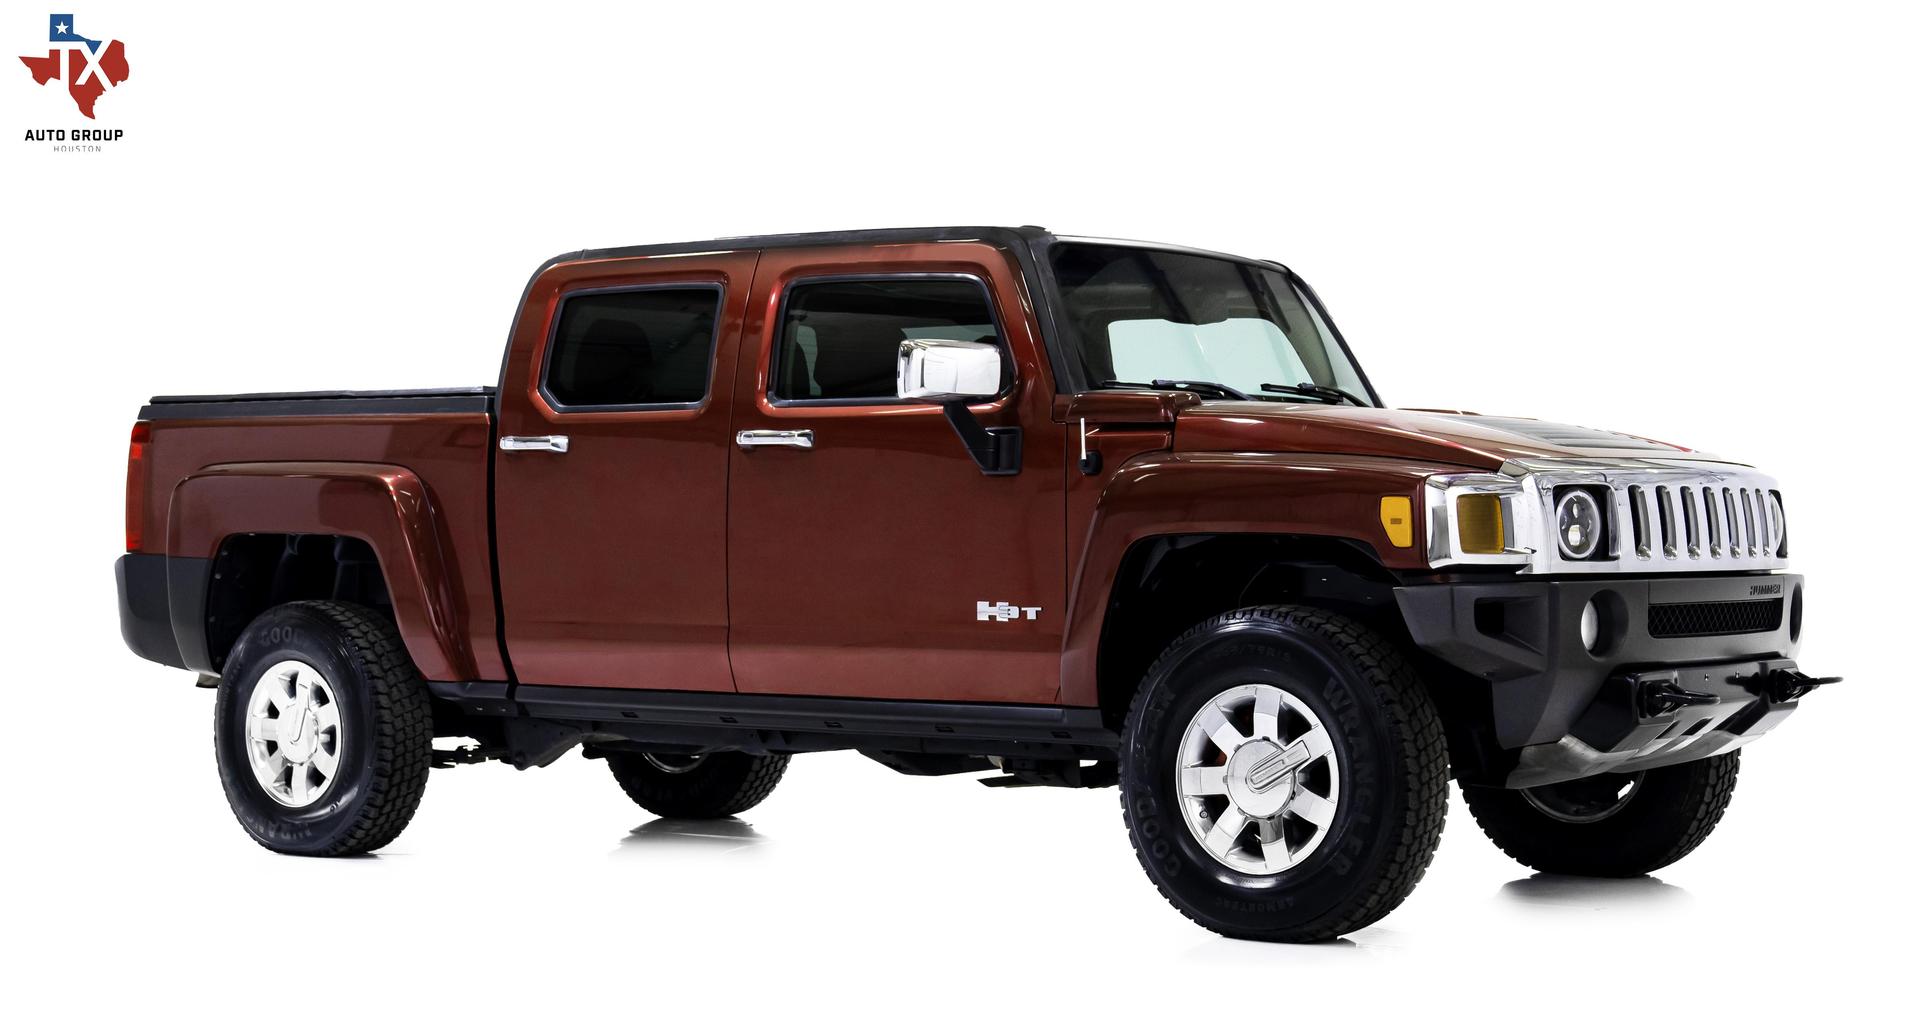 Used Hummer H3T's nationwide for sale - MotorCloud